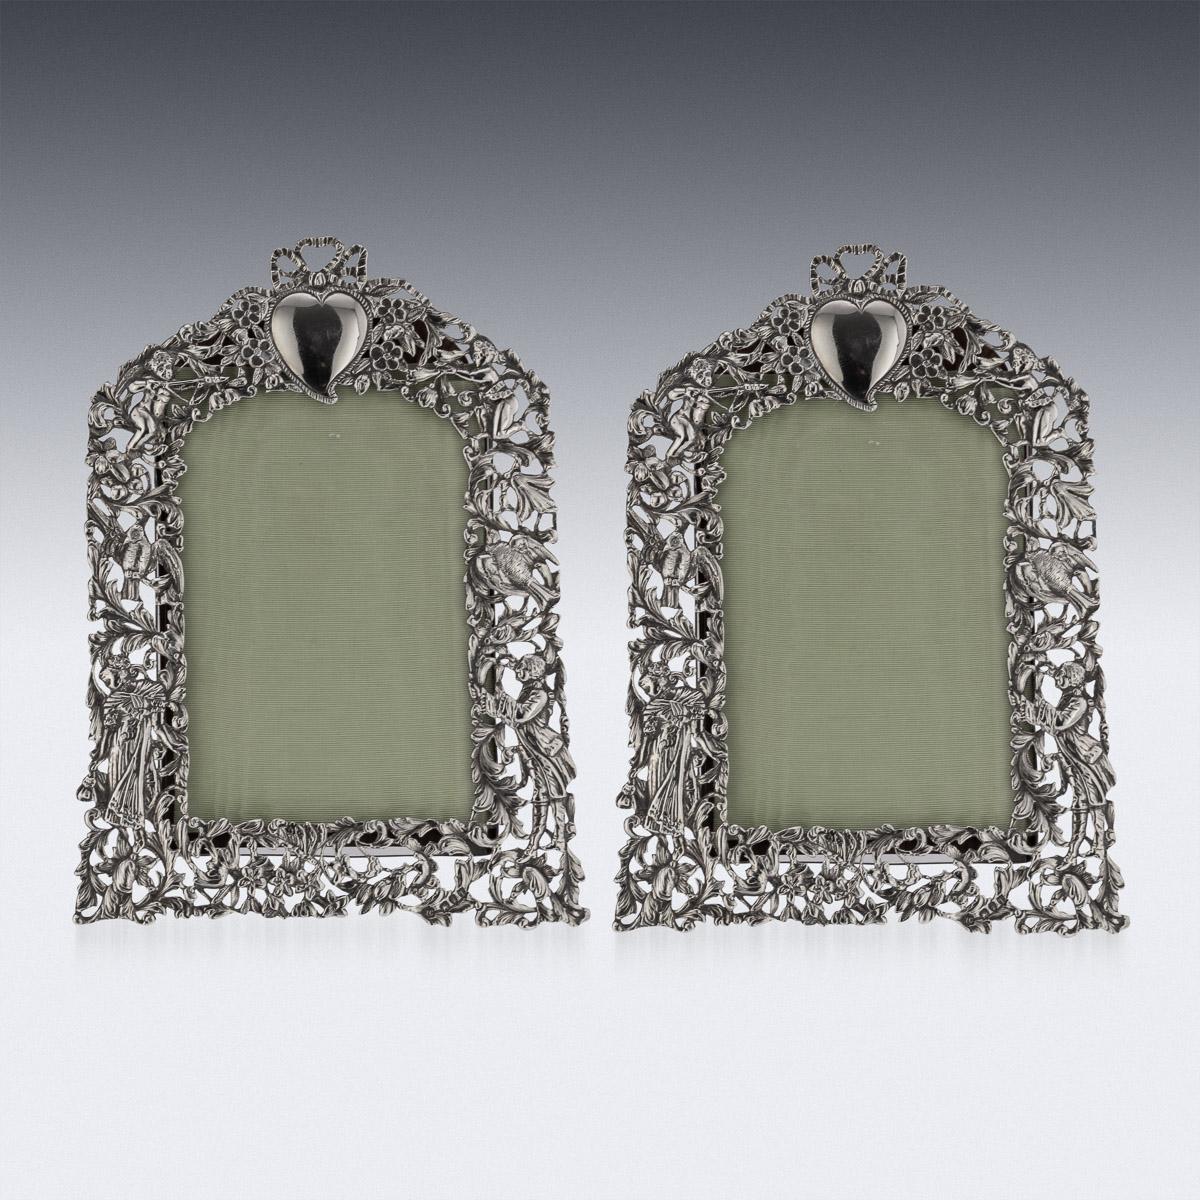 19th century Victorian pair of silver photograph frames, of arched rectangular form with pierced figural, birds and putti in a foliate surround, surmounted by a heart-shaped cartouche, glazed central aperture with green silk lining, on a hardwood